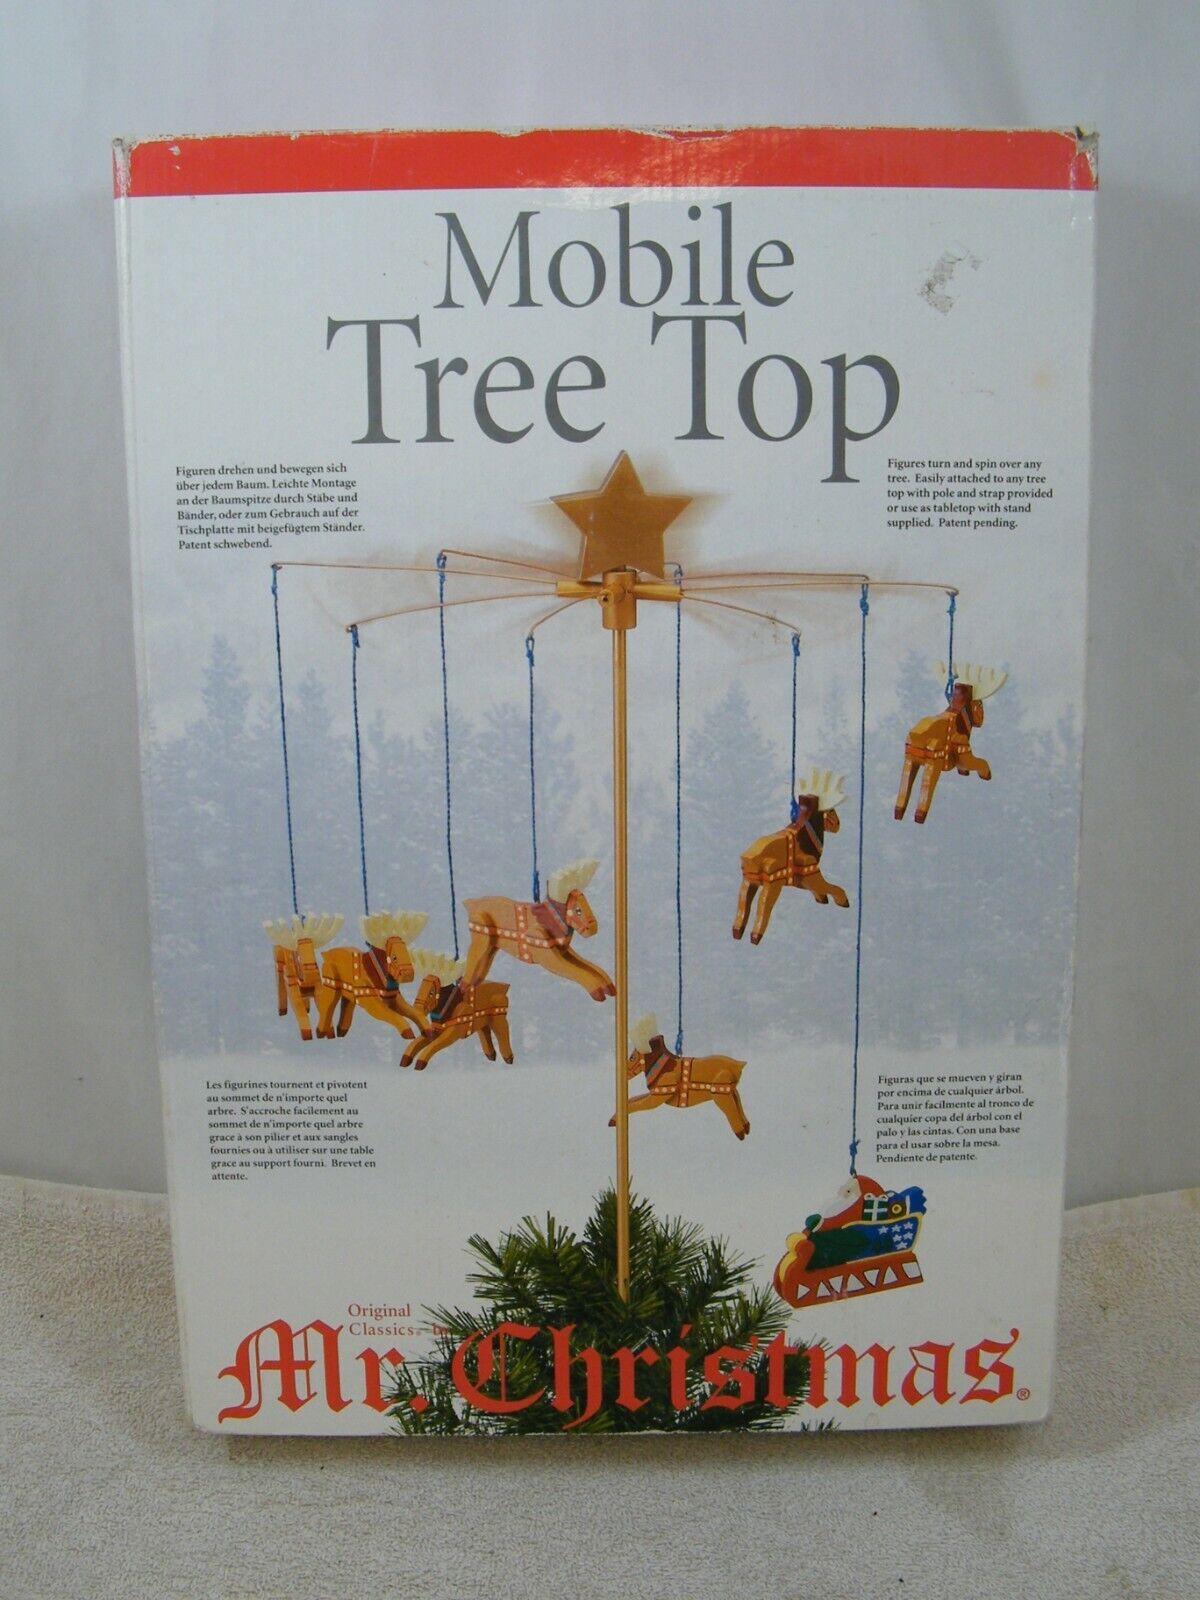 NEW RARE MR CHRISTMAS MOBILE TREE TOP OR TABLE TOP, SEALED, BOX WORN, NOS